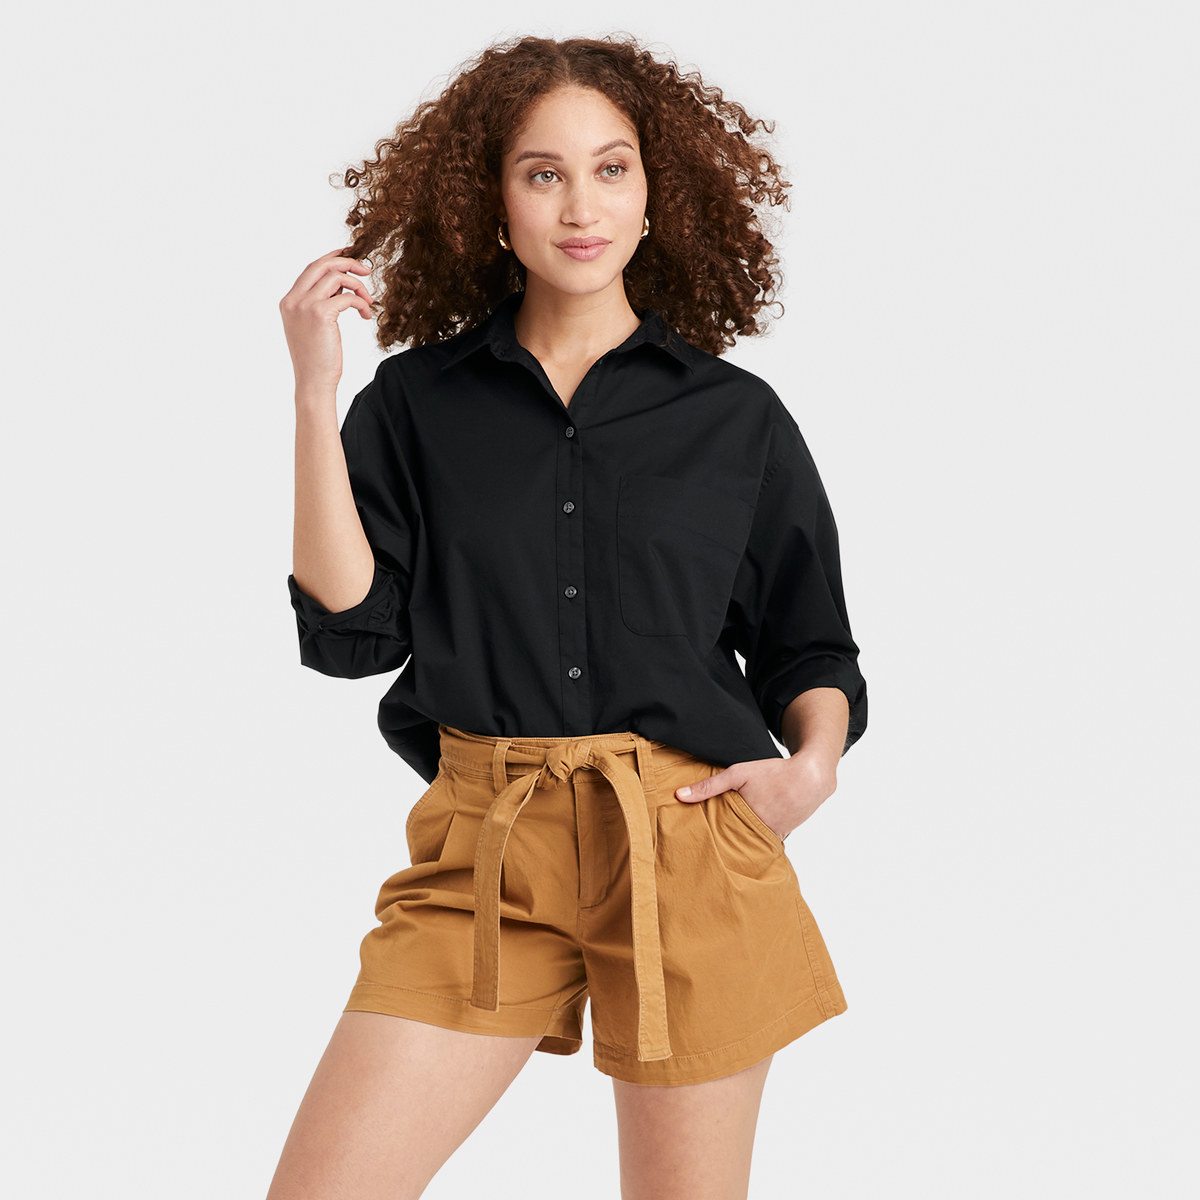 Woman wears knotted shorts and comfortable black shirt